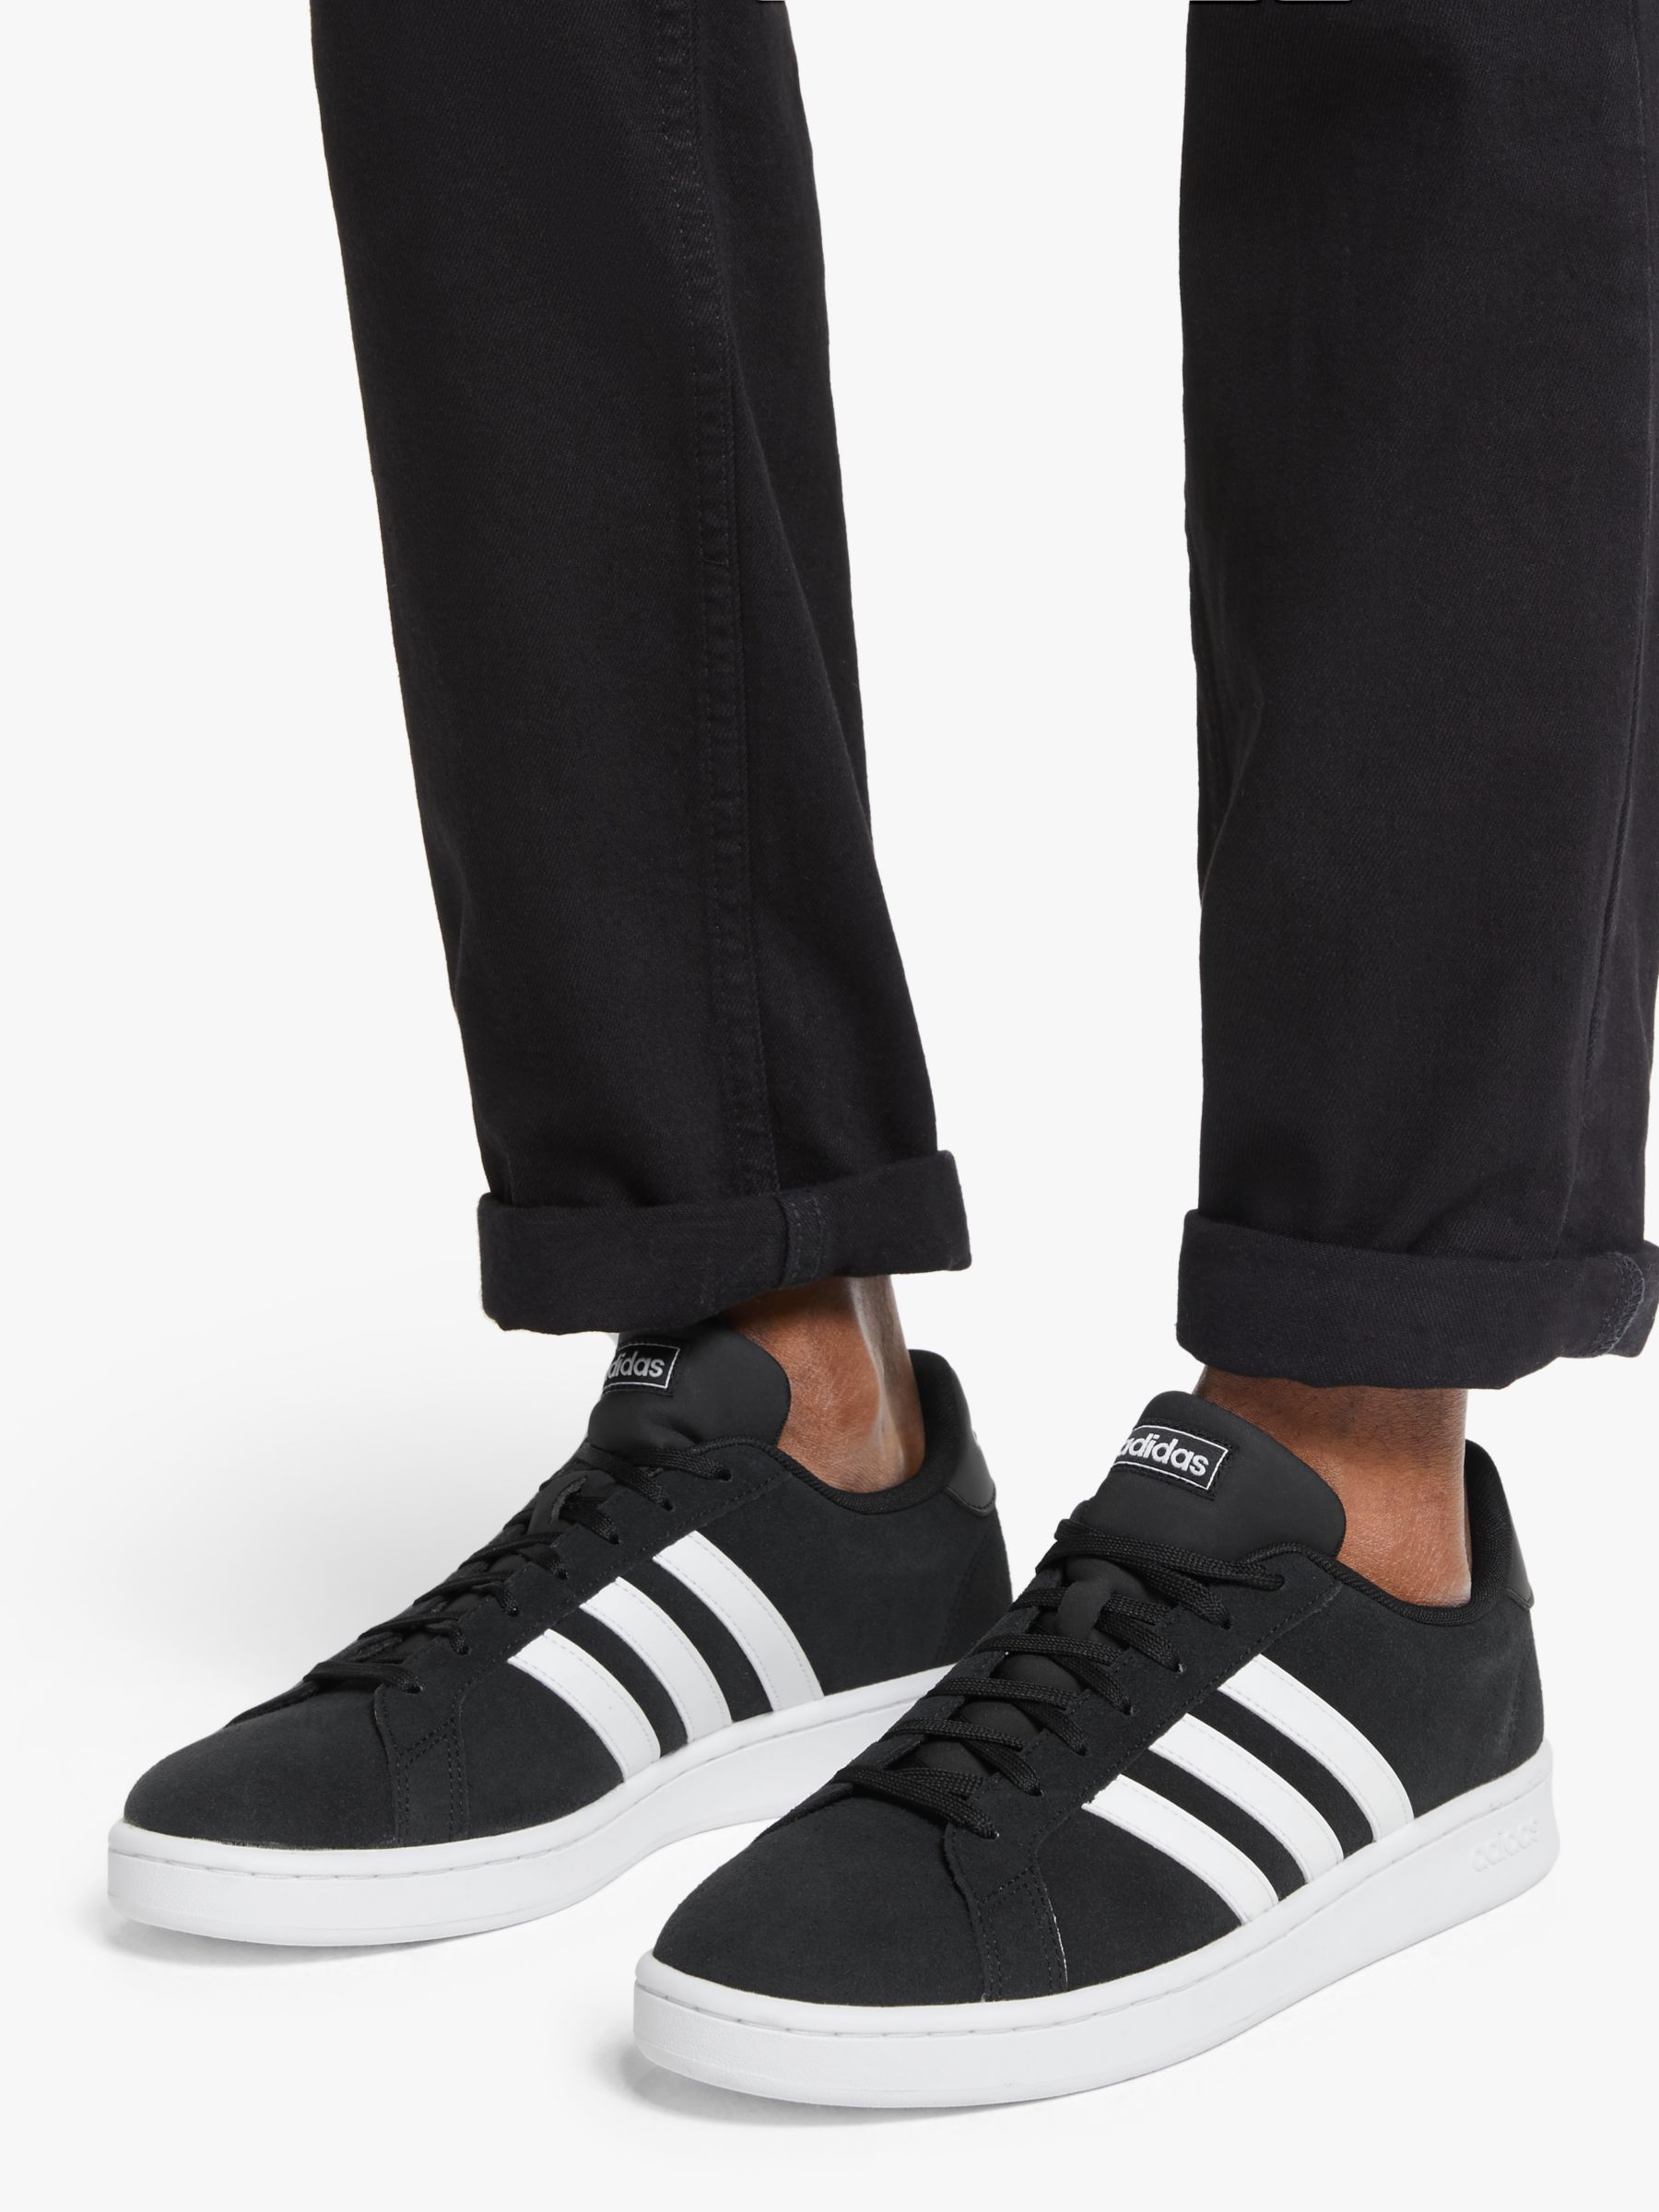 adidas black suede trainers